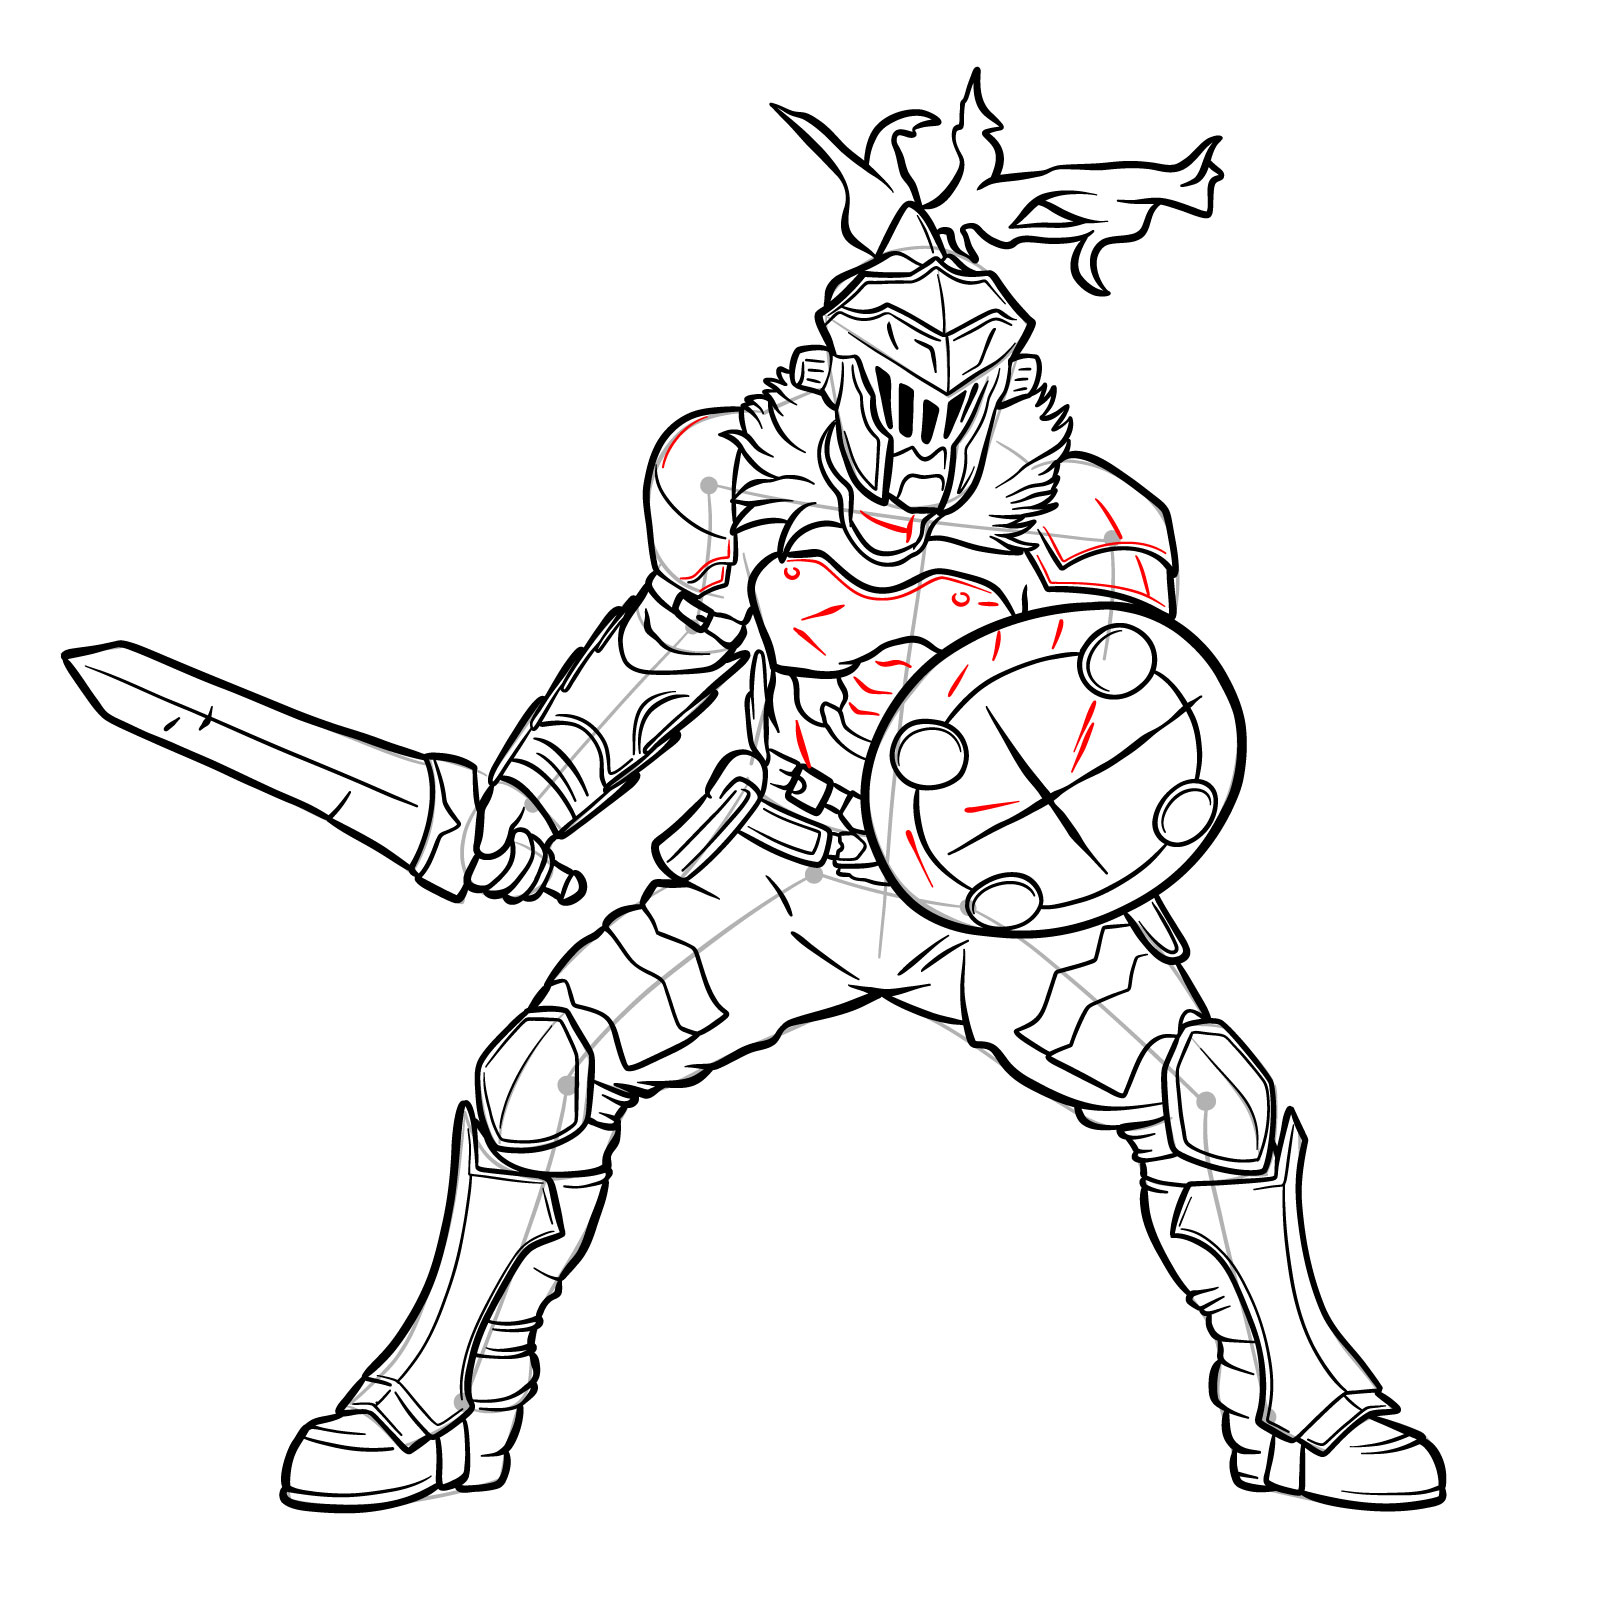 How to Draw Goblin Slayer in battle stance - step 41